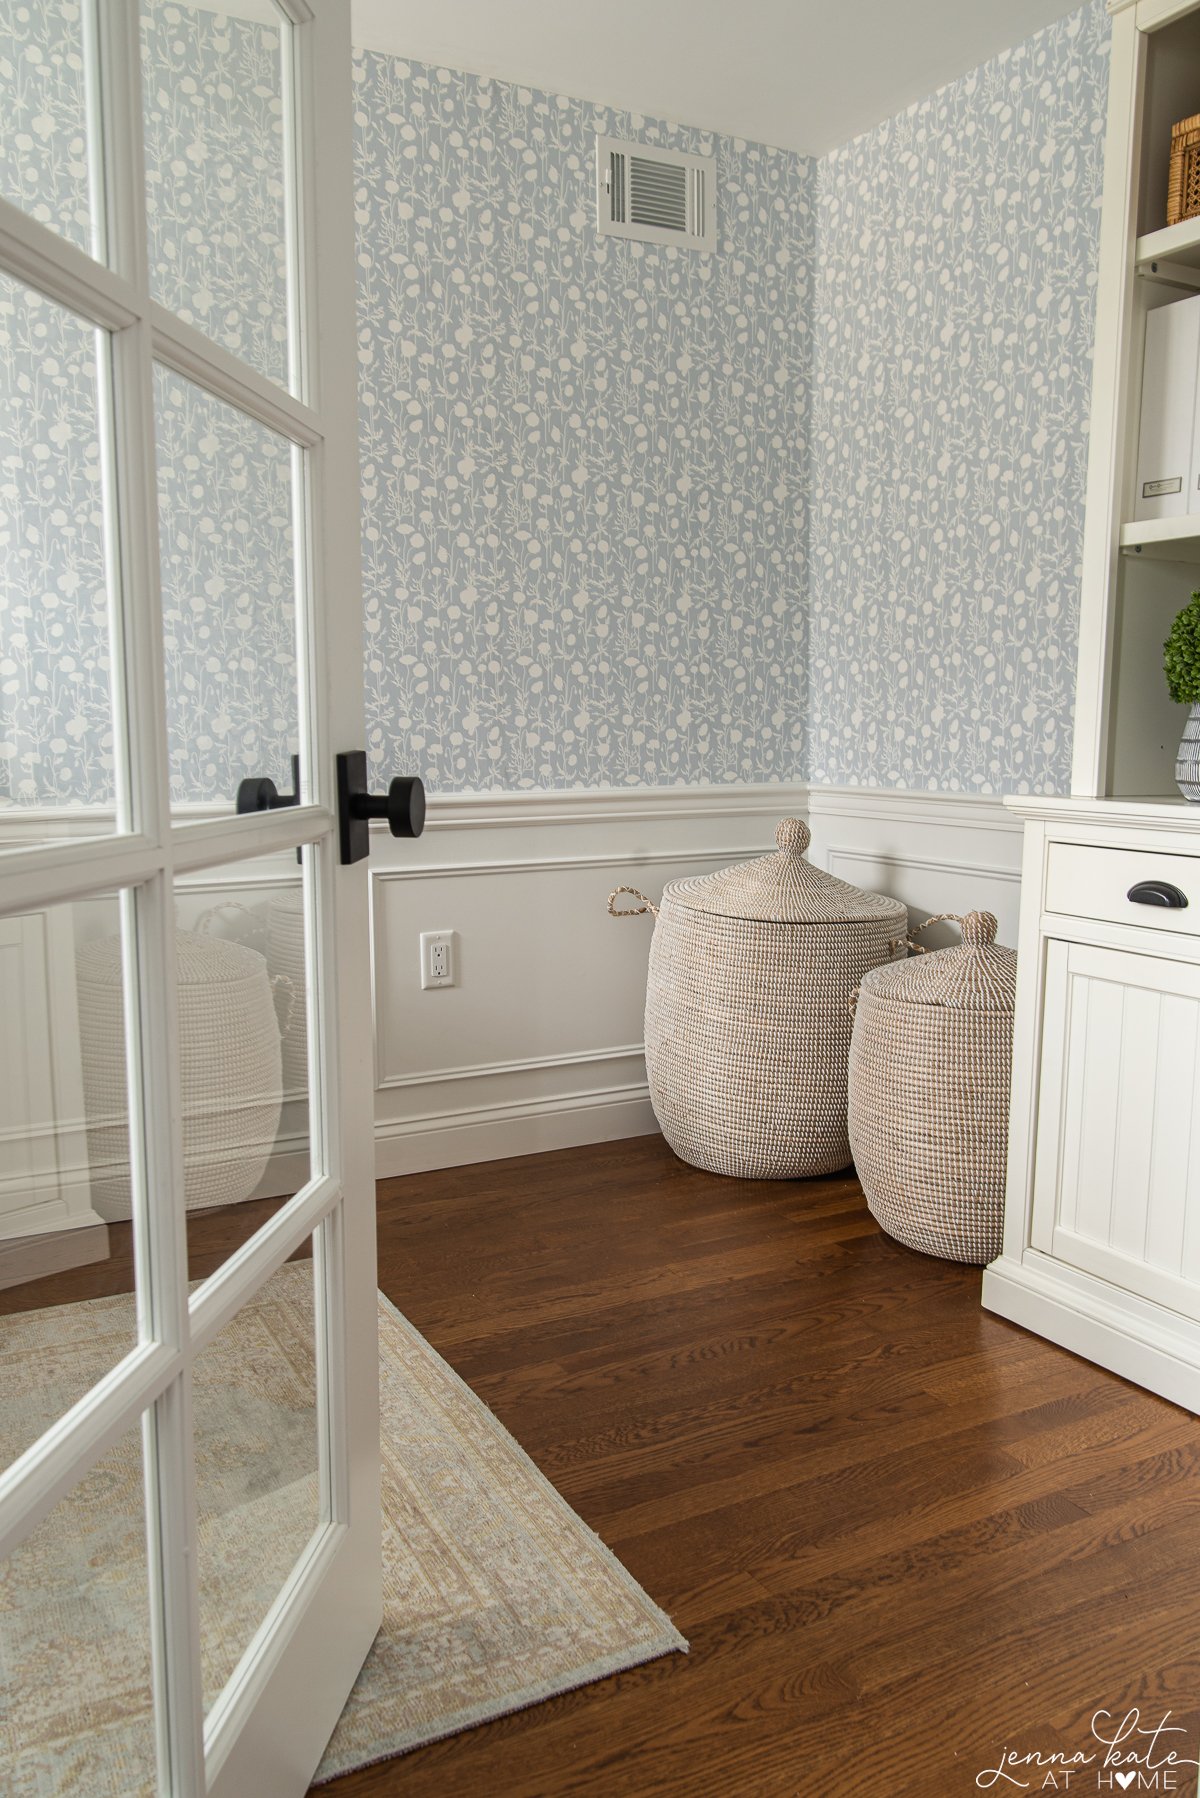 room with warm wood floors, white wainscoting and blue floral wallpaper